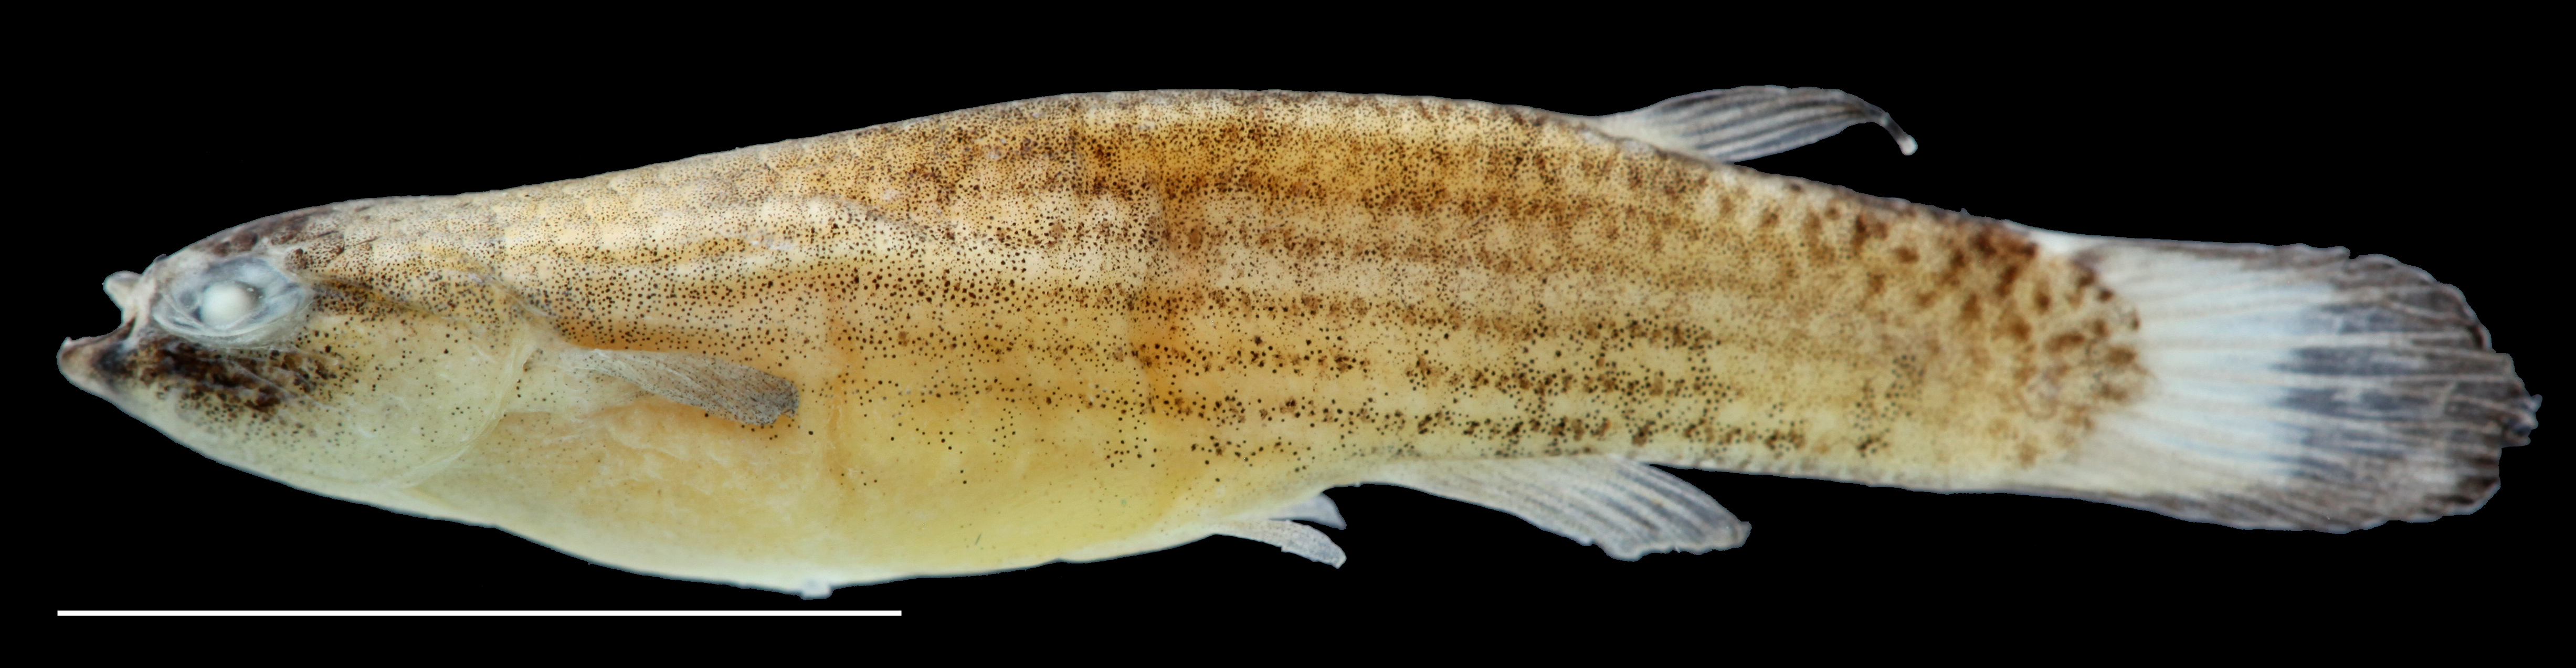 Holotype of <em>Laimosemion leticia</em>, IAvH-P-12943_Lateral, 21.1 mm SL (scale bar = 1 cm). Photograph by C. DoNascimiento